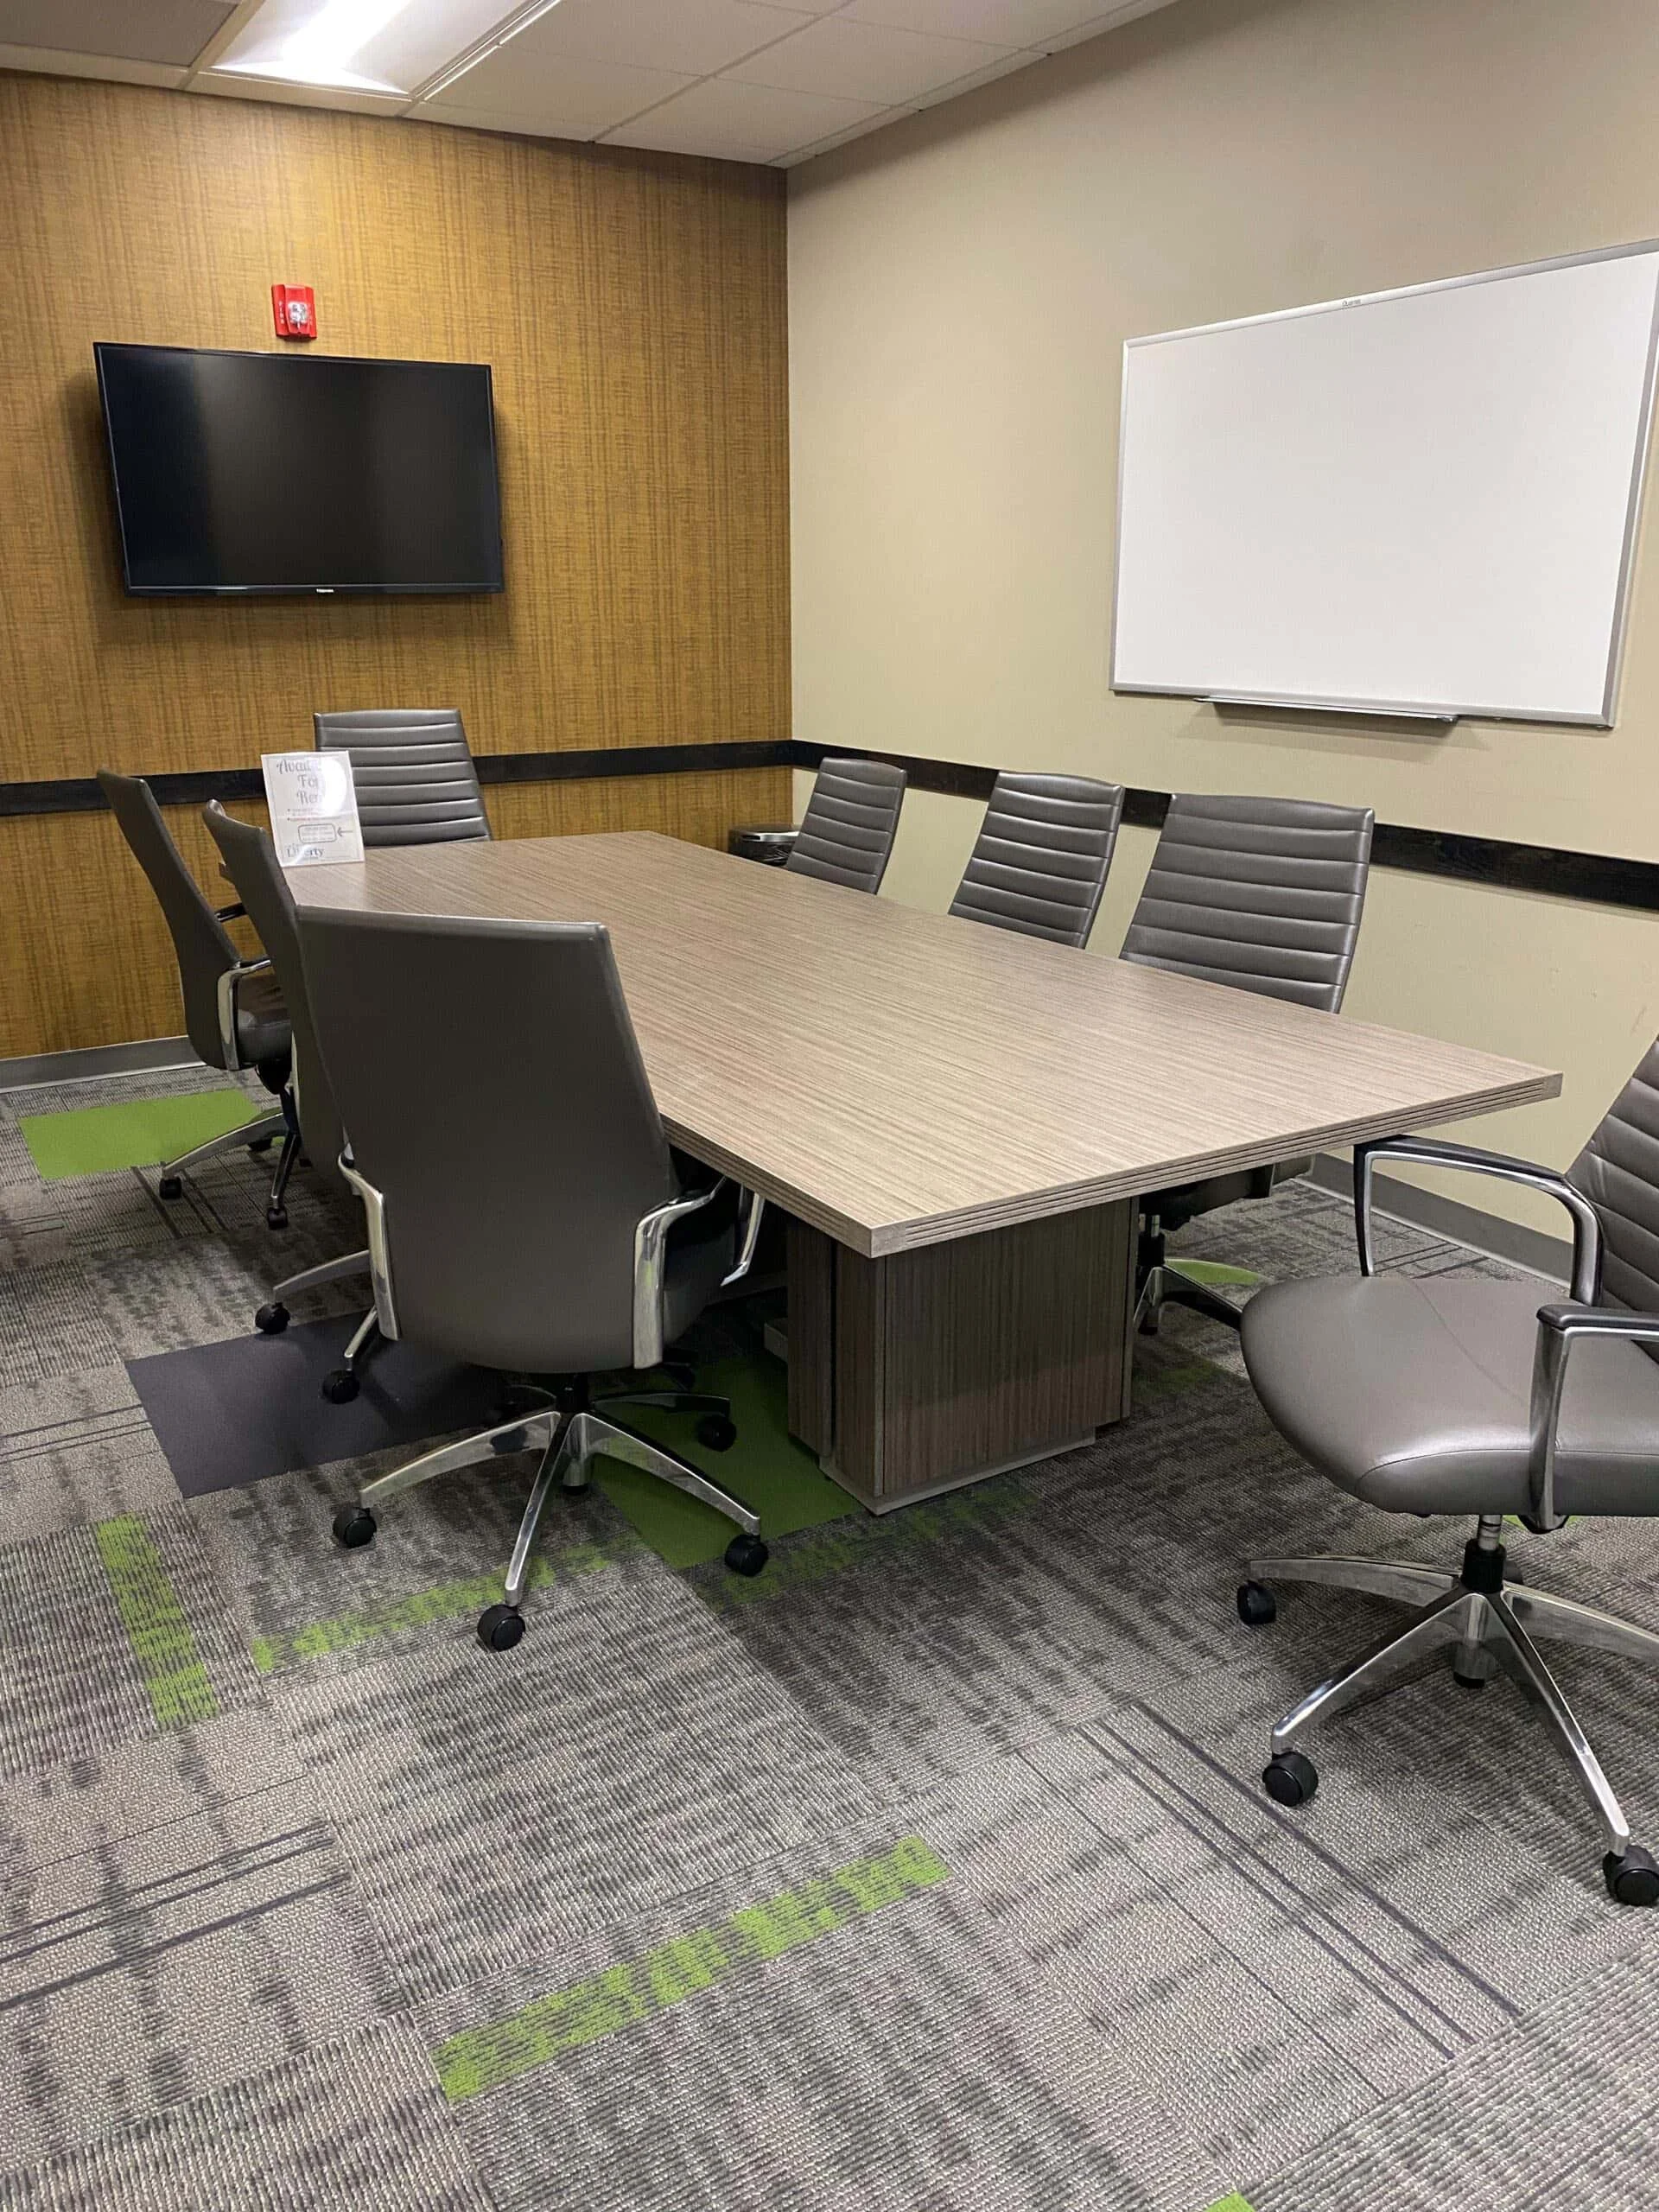 Hourly Meeting Room Rental with Excellent Amenities for Productive Meetings. Book Your Ideal Meeting Space Today!